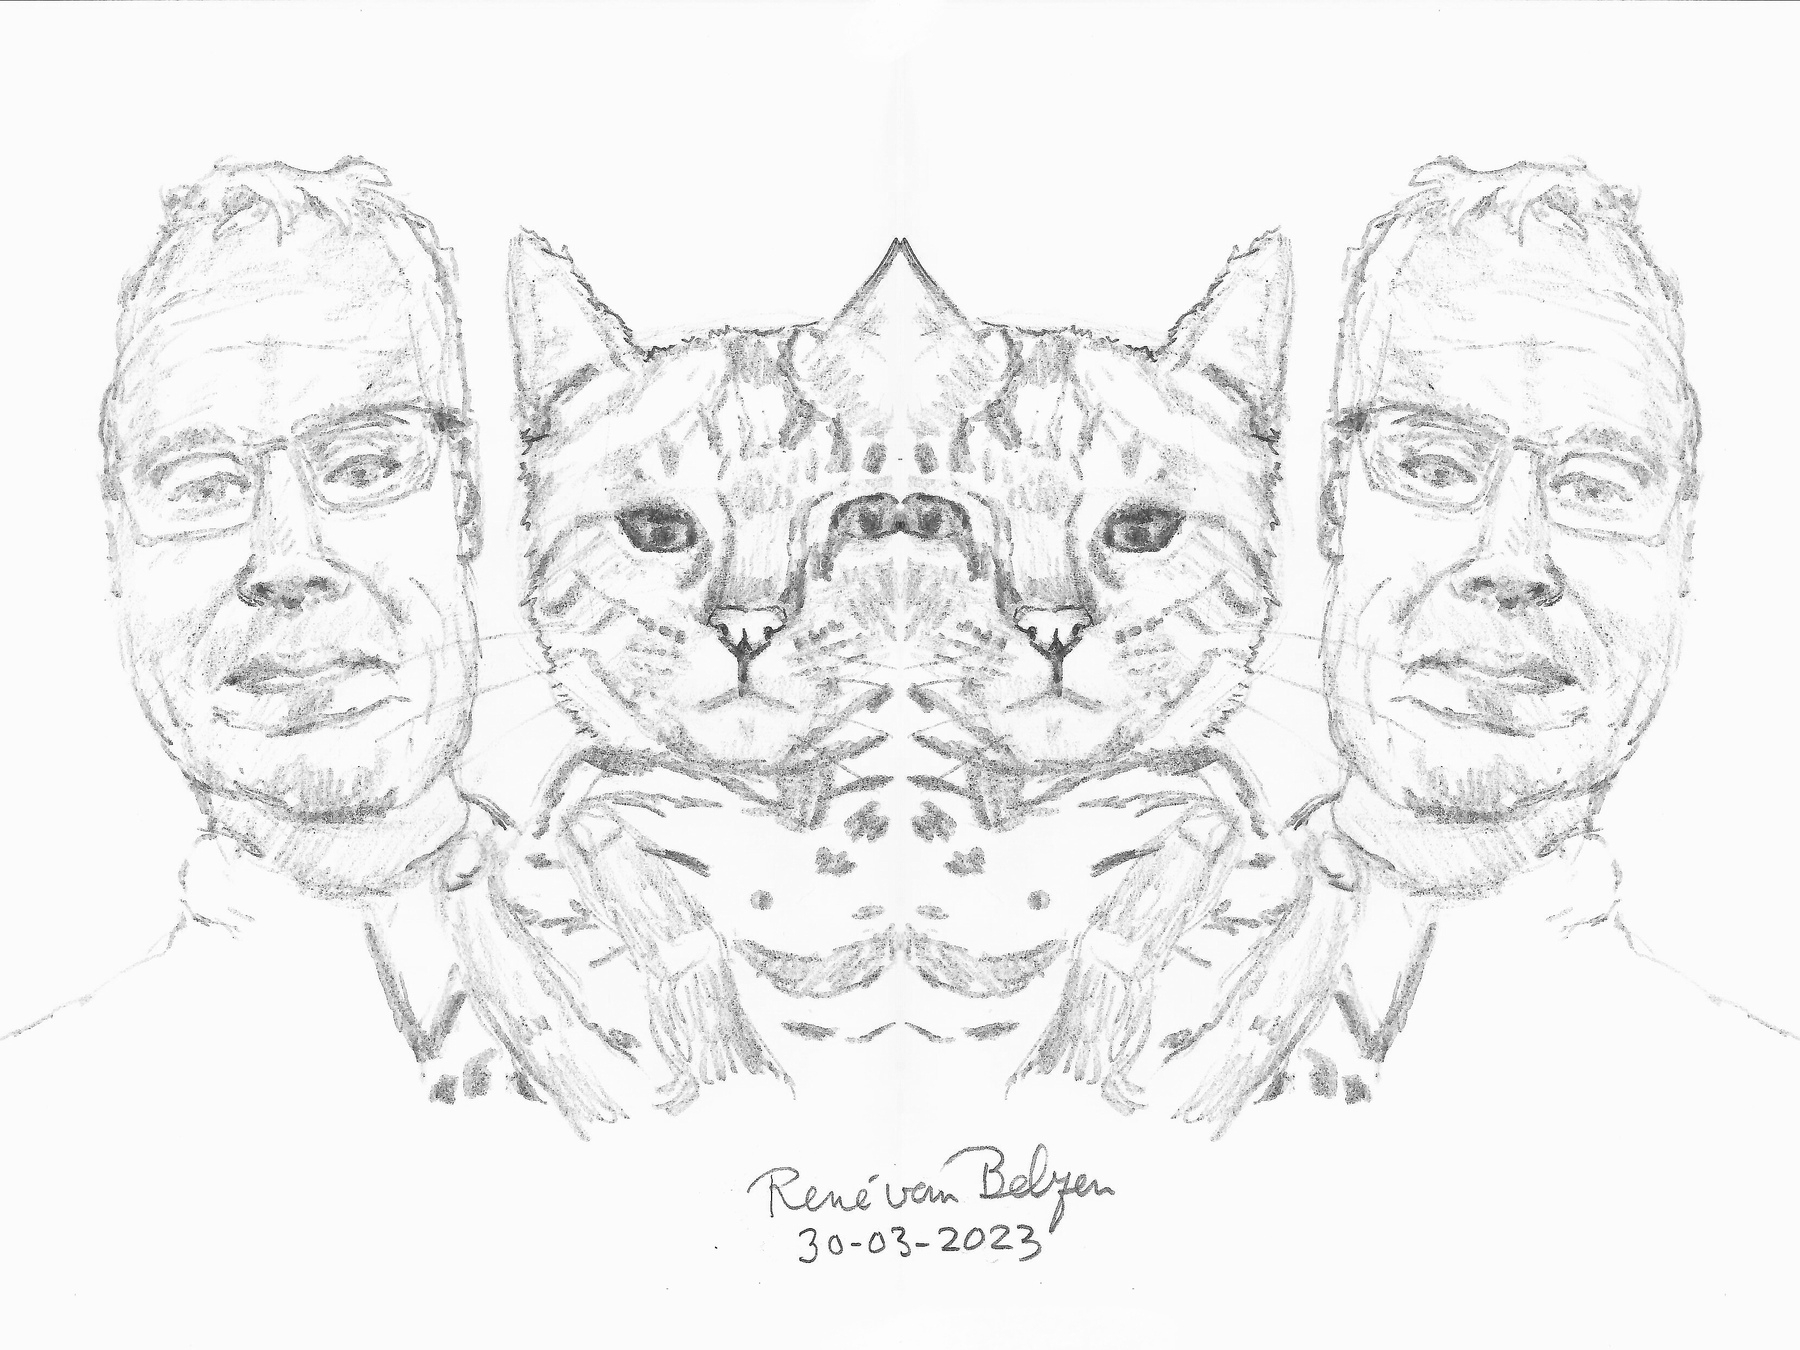 mirrorred pencil sketch of man holding cat